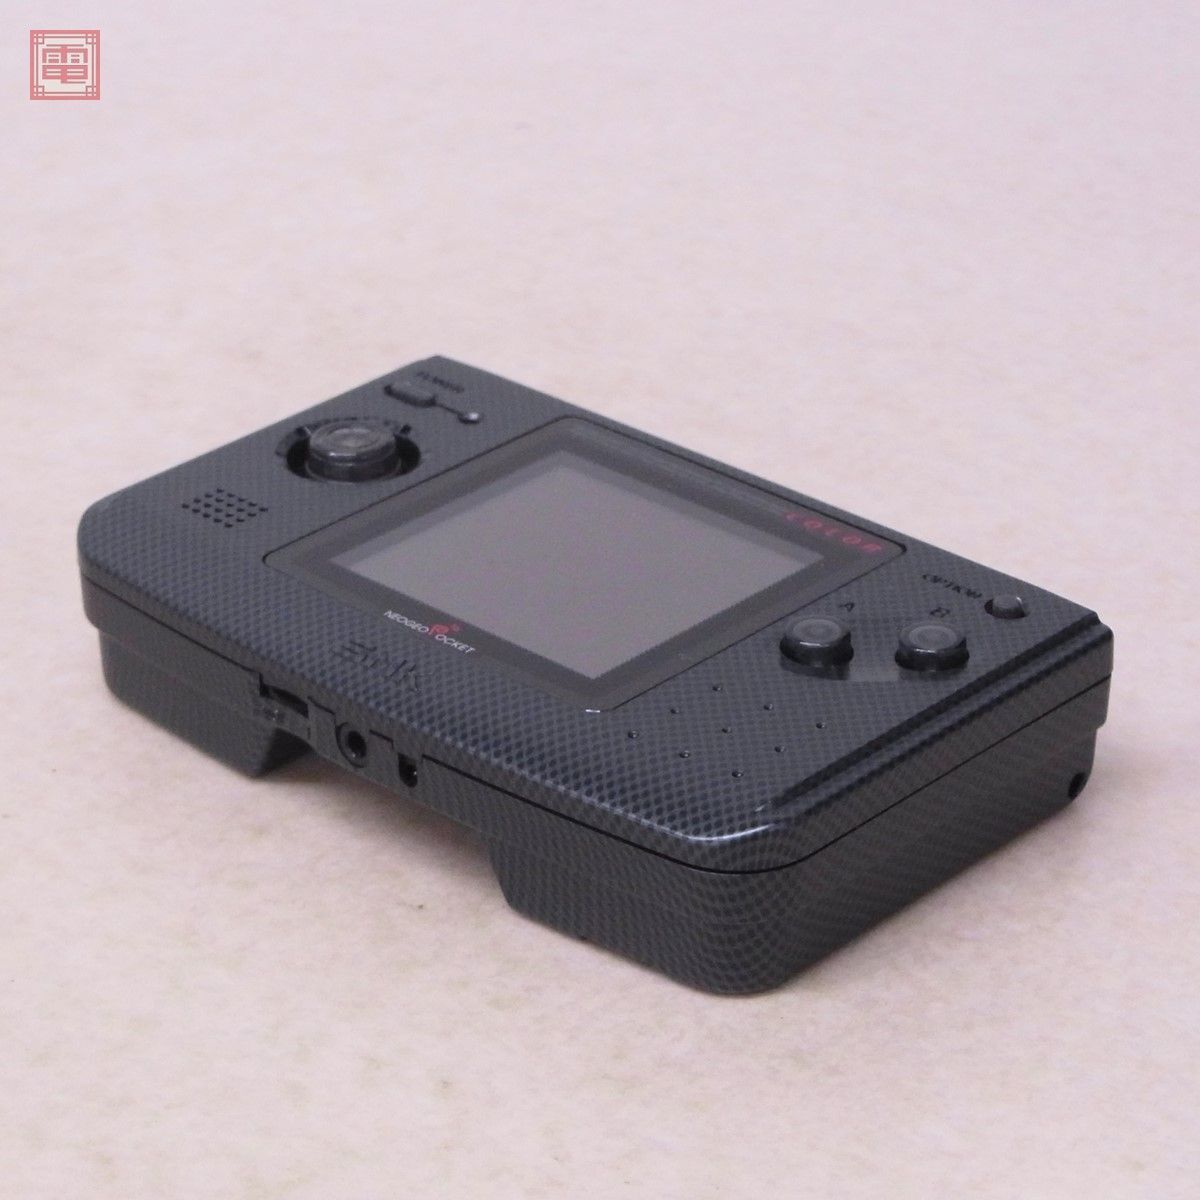  operation goods serial coincidence NGP Neo geo pocket color body NEOP52010 carbon black NEO GEOes*en* Kei SNK box opinion attaching [10